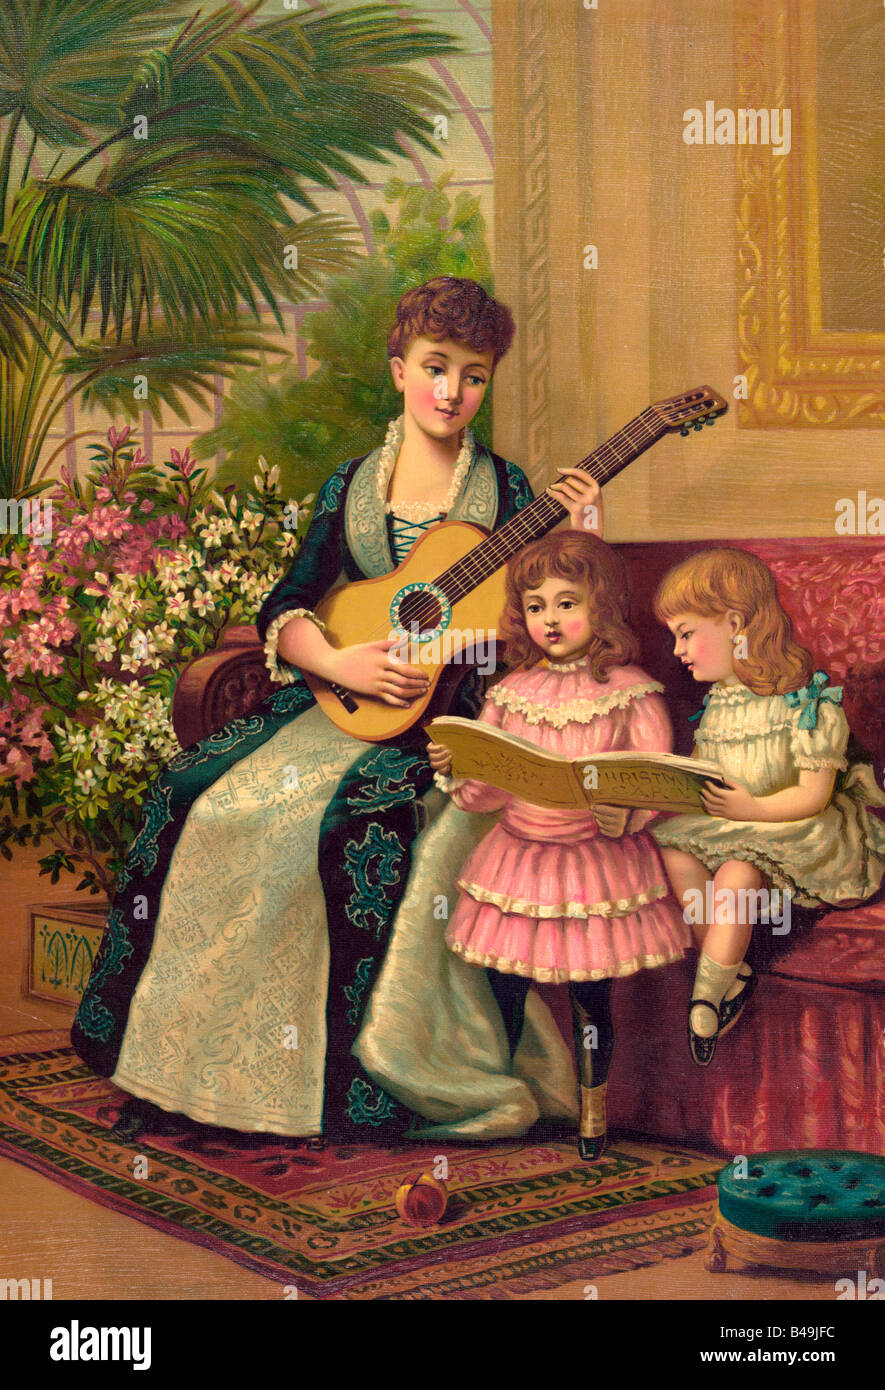 Victorian Era Print showing mother with guitar and two children singing Christmas Carols Stock Photo